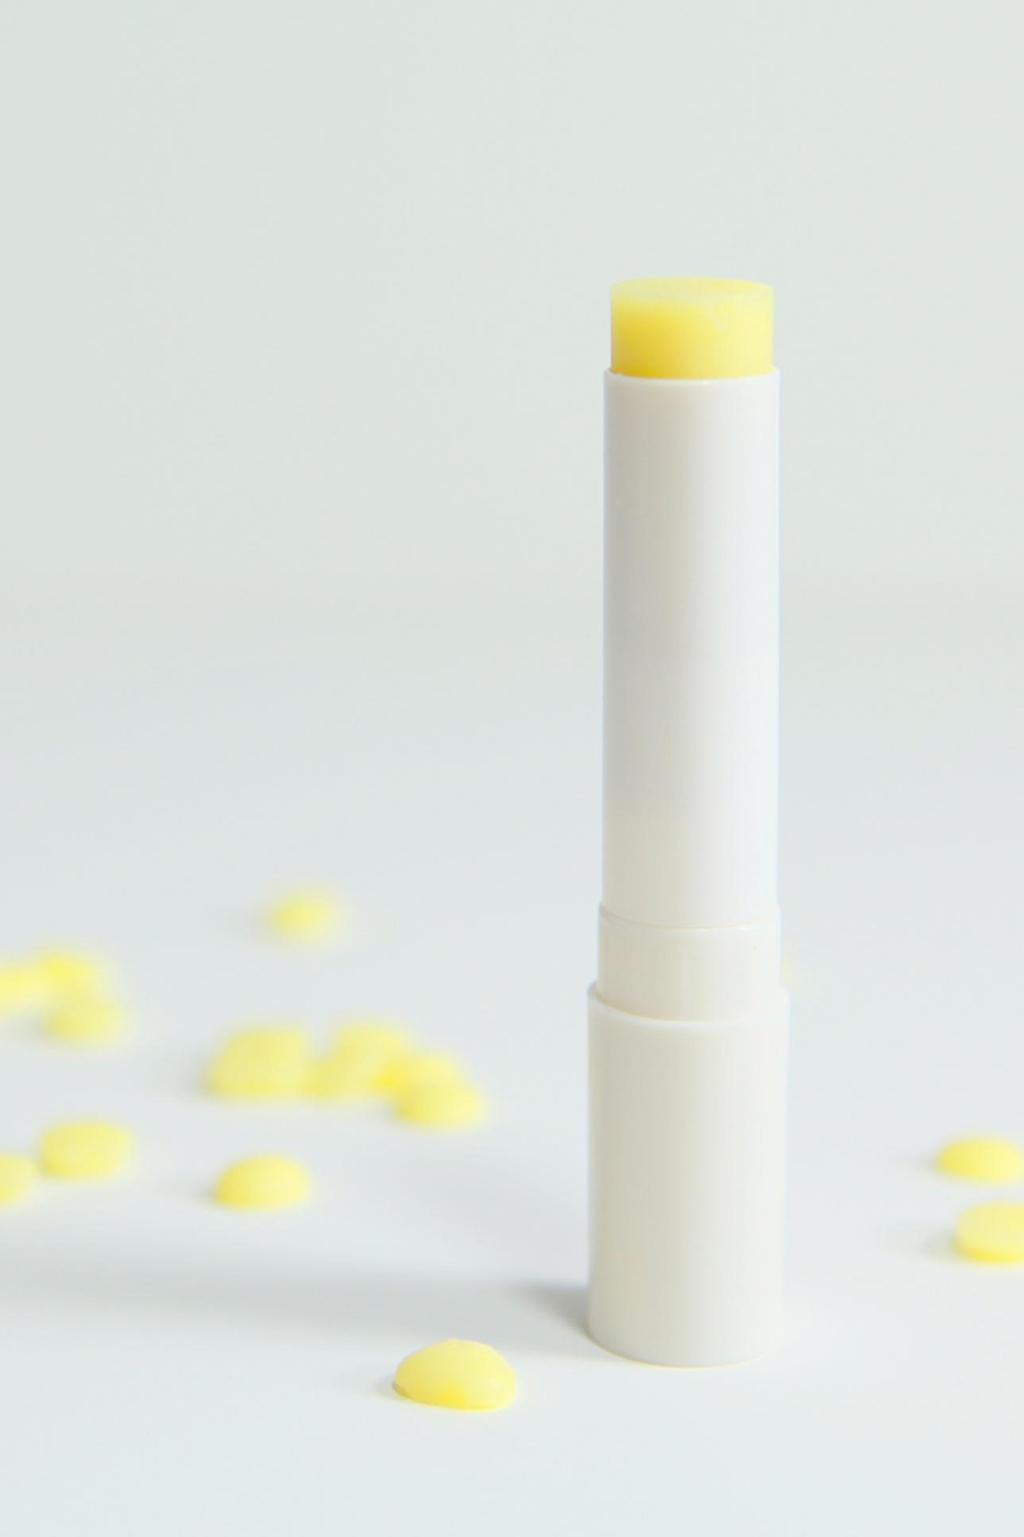 Basic Lip Balm Recipe This is a basic recipe for lip balm that has the right balance of oil and wax to both moisturize and protect your lips.